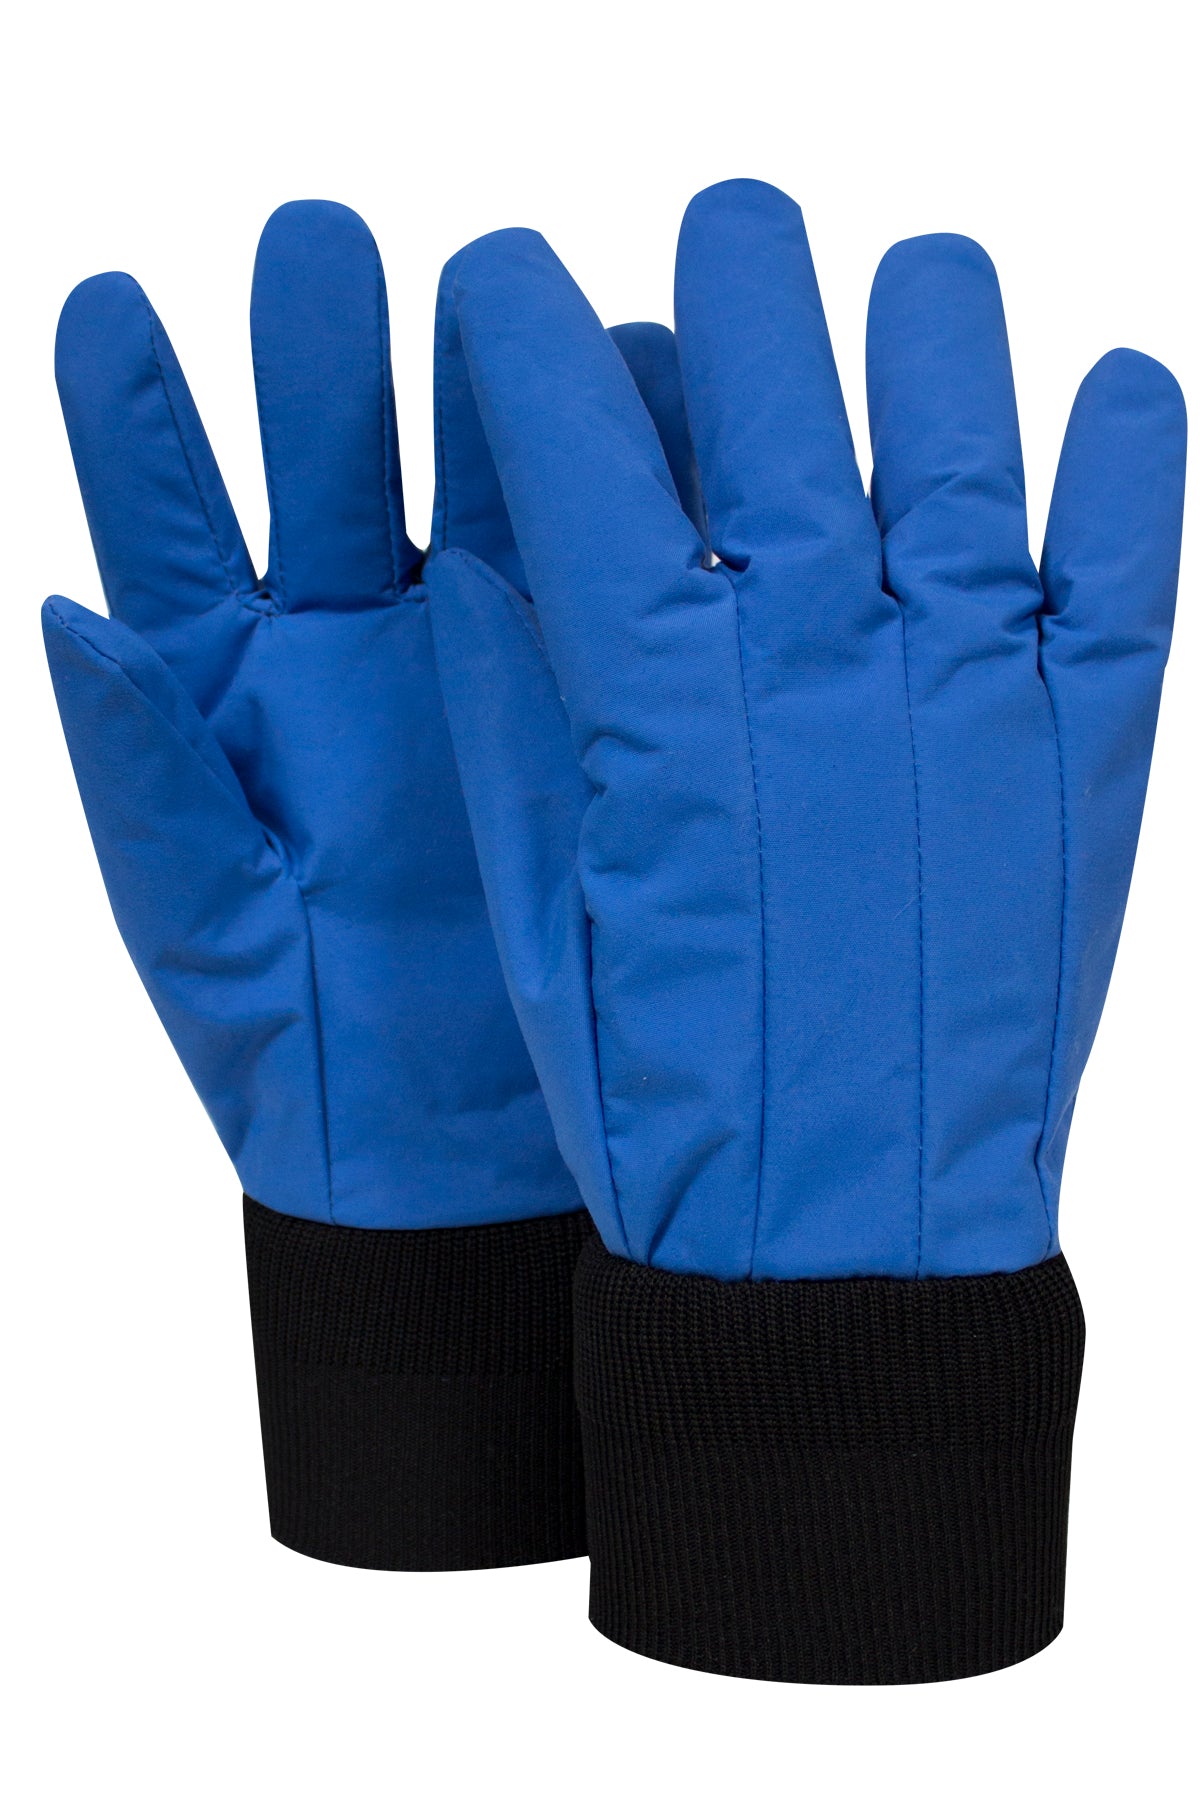 Water Resistant Wrist Length Cryogenic Gloves